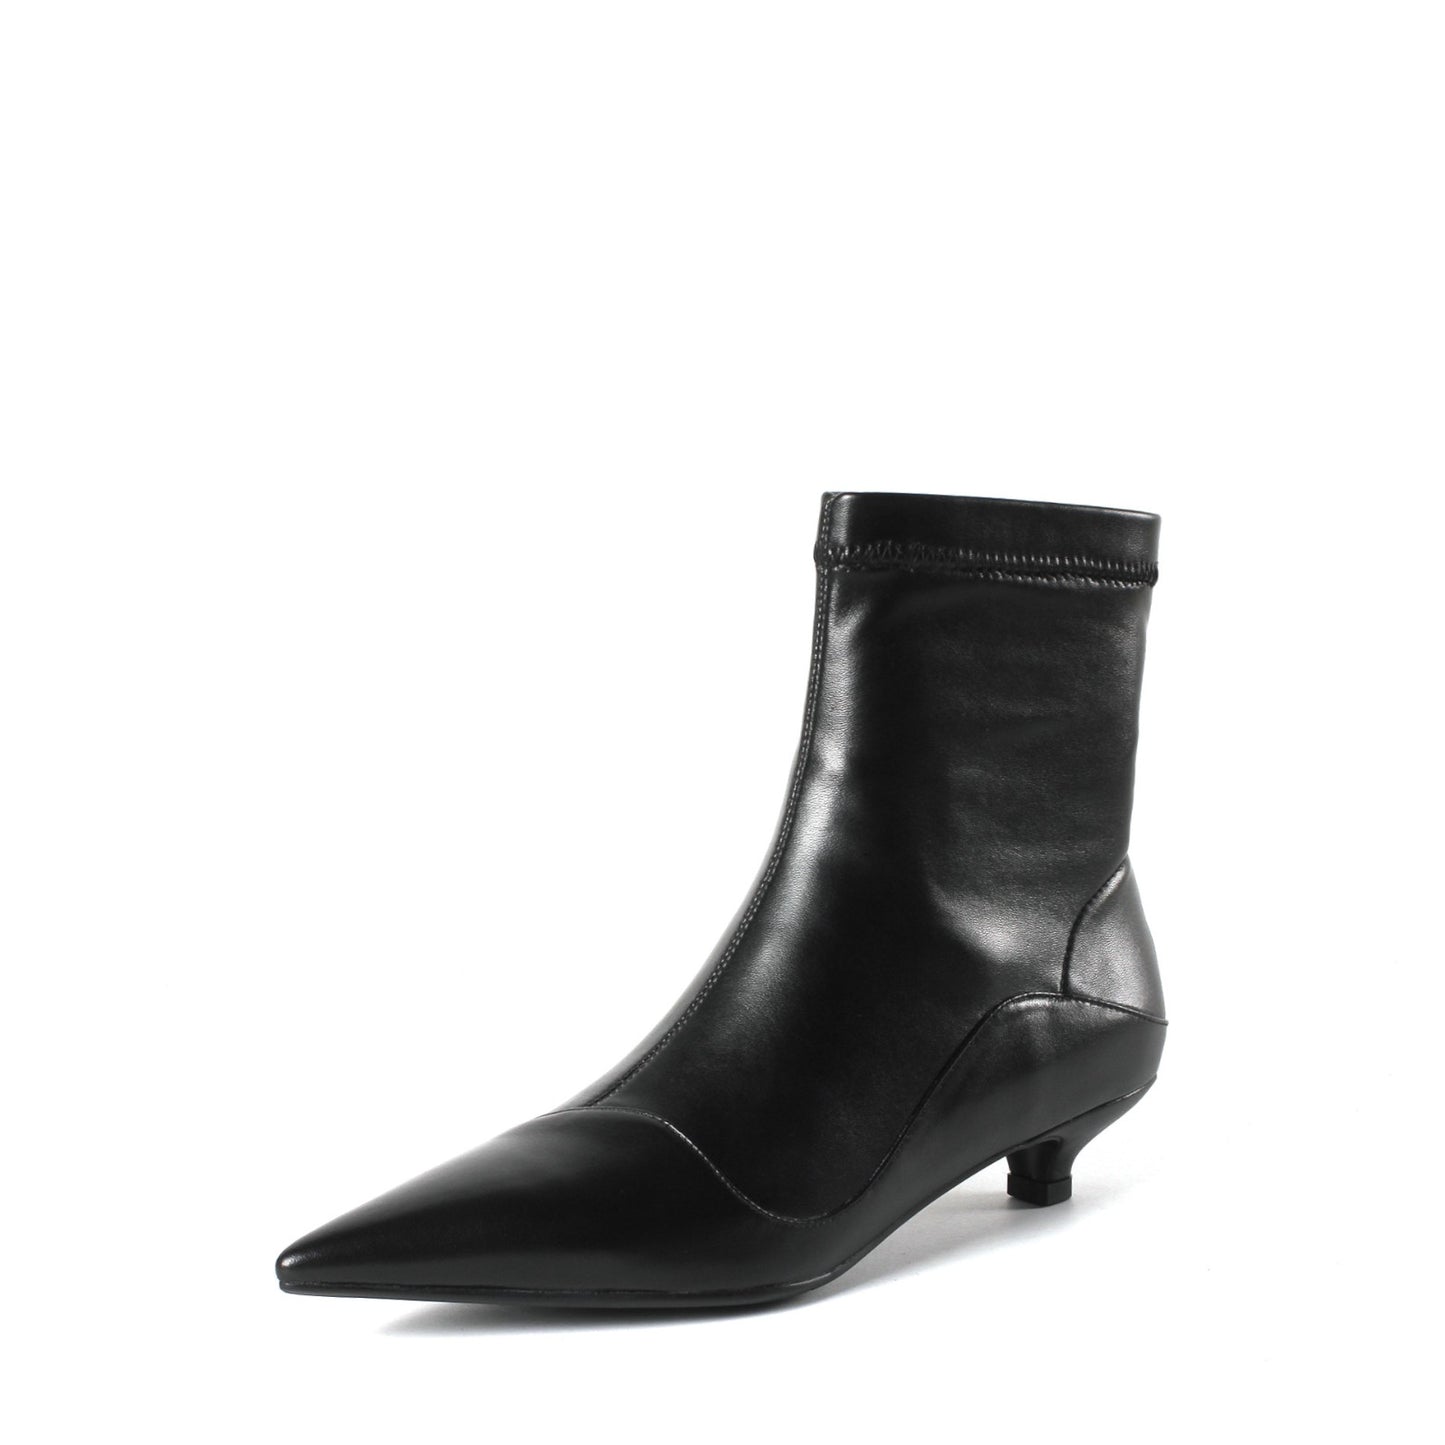 Kaly-Kitten-Heels-Pointed-Toe-Stitching-Vamp-Black-Ankle-Boots-Leather